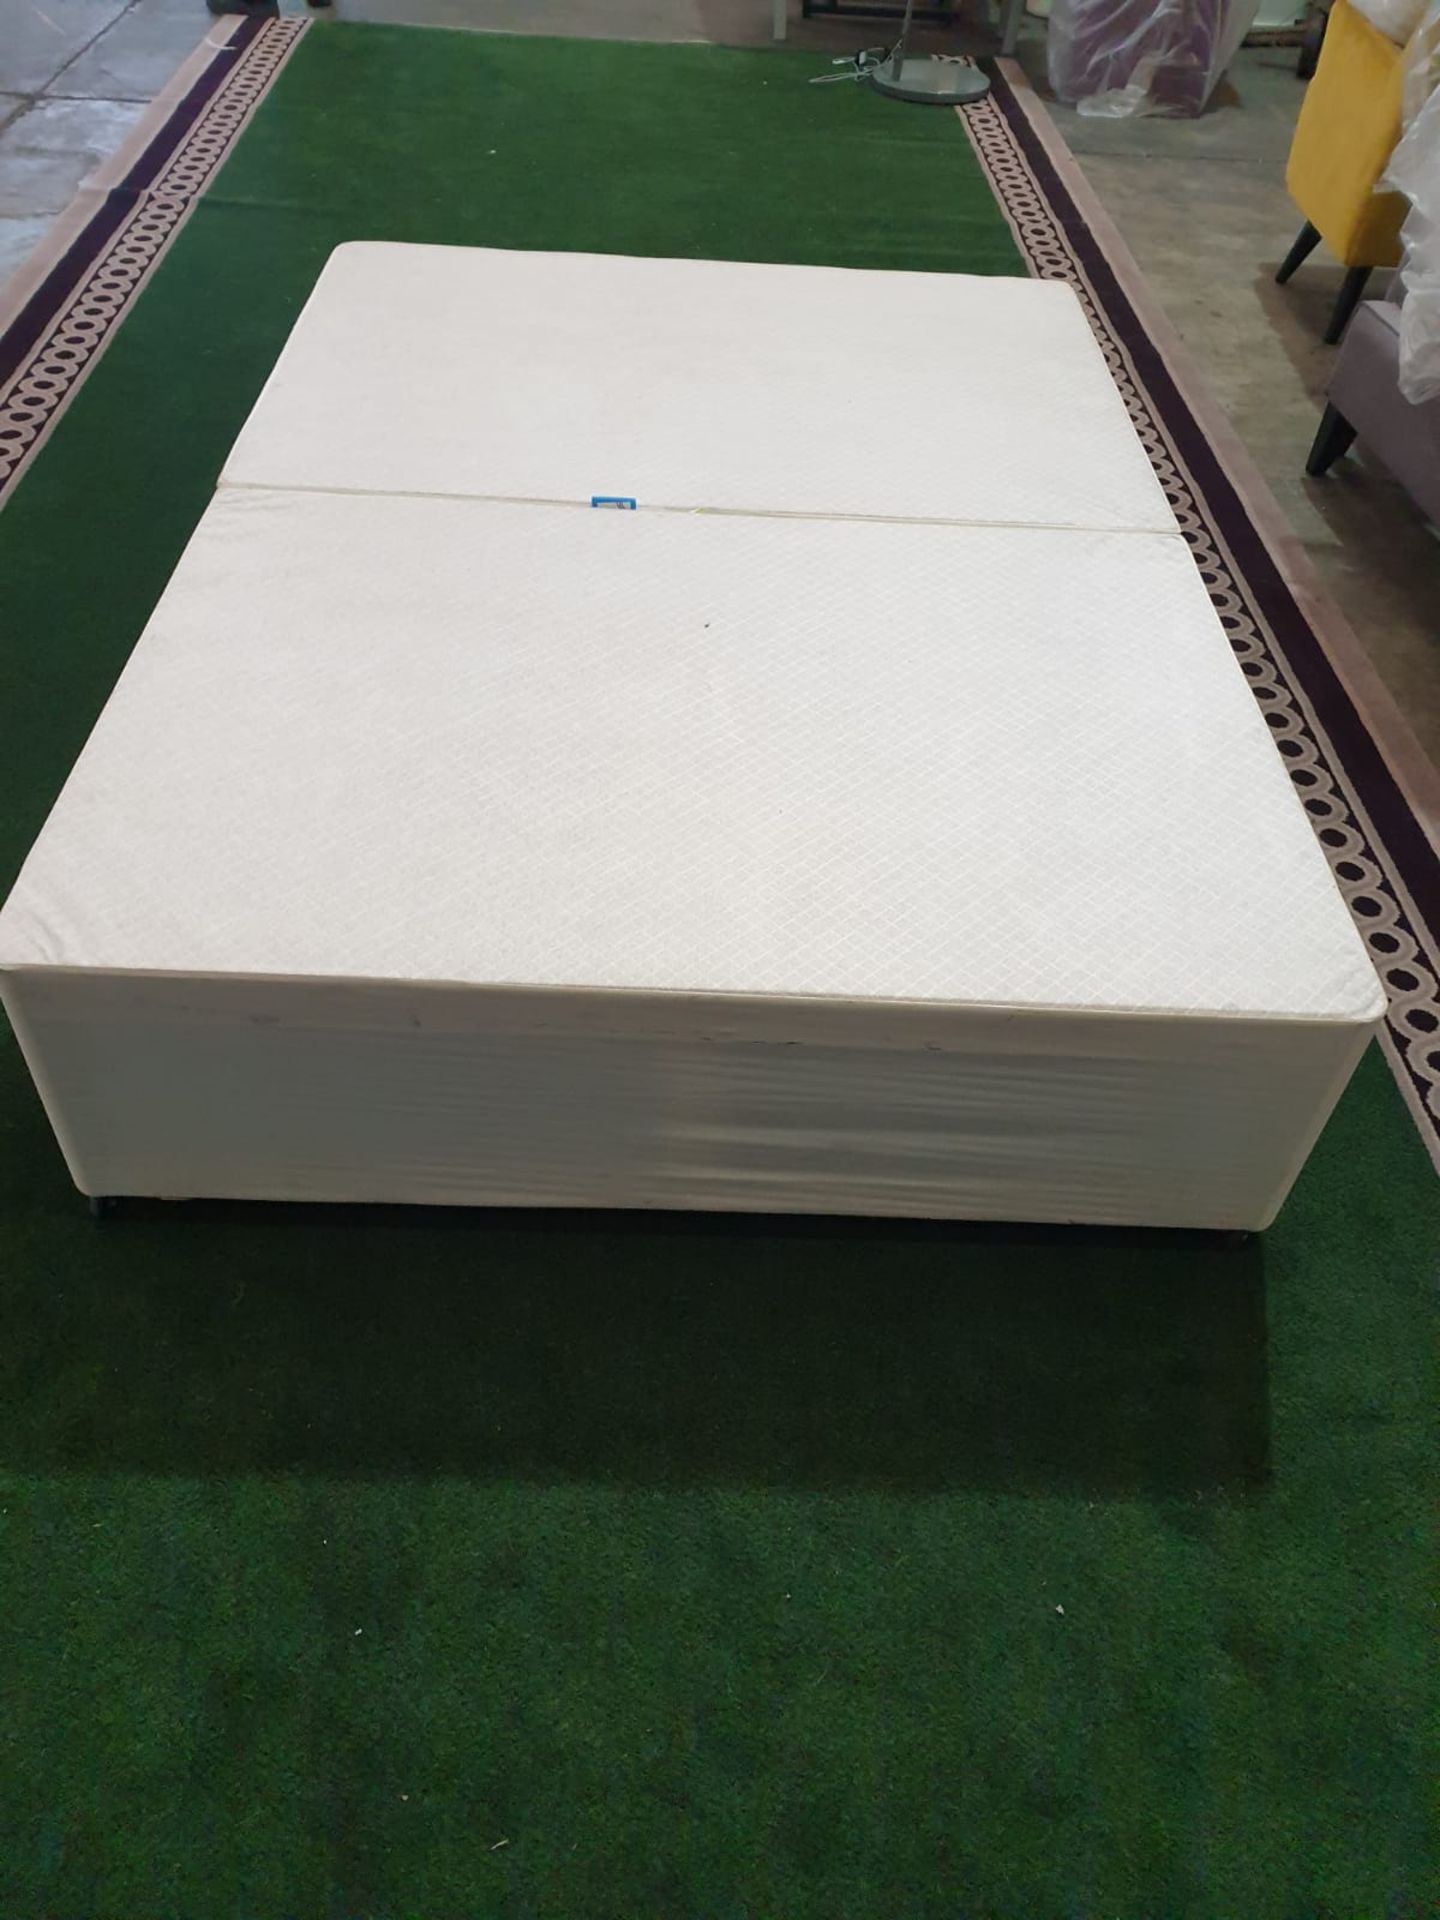 4FT6 Double Bed Base Divan Cream (ST29) - Image 3 of 3